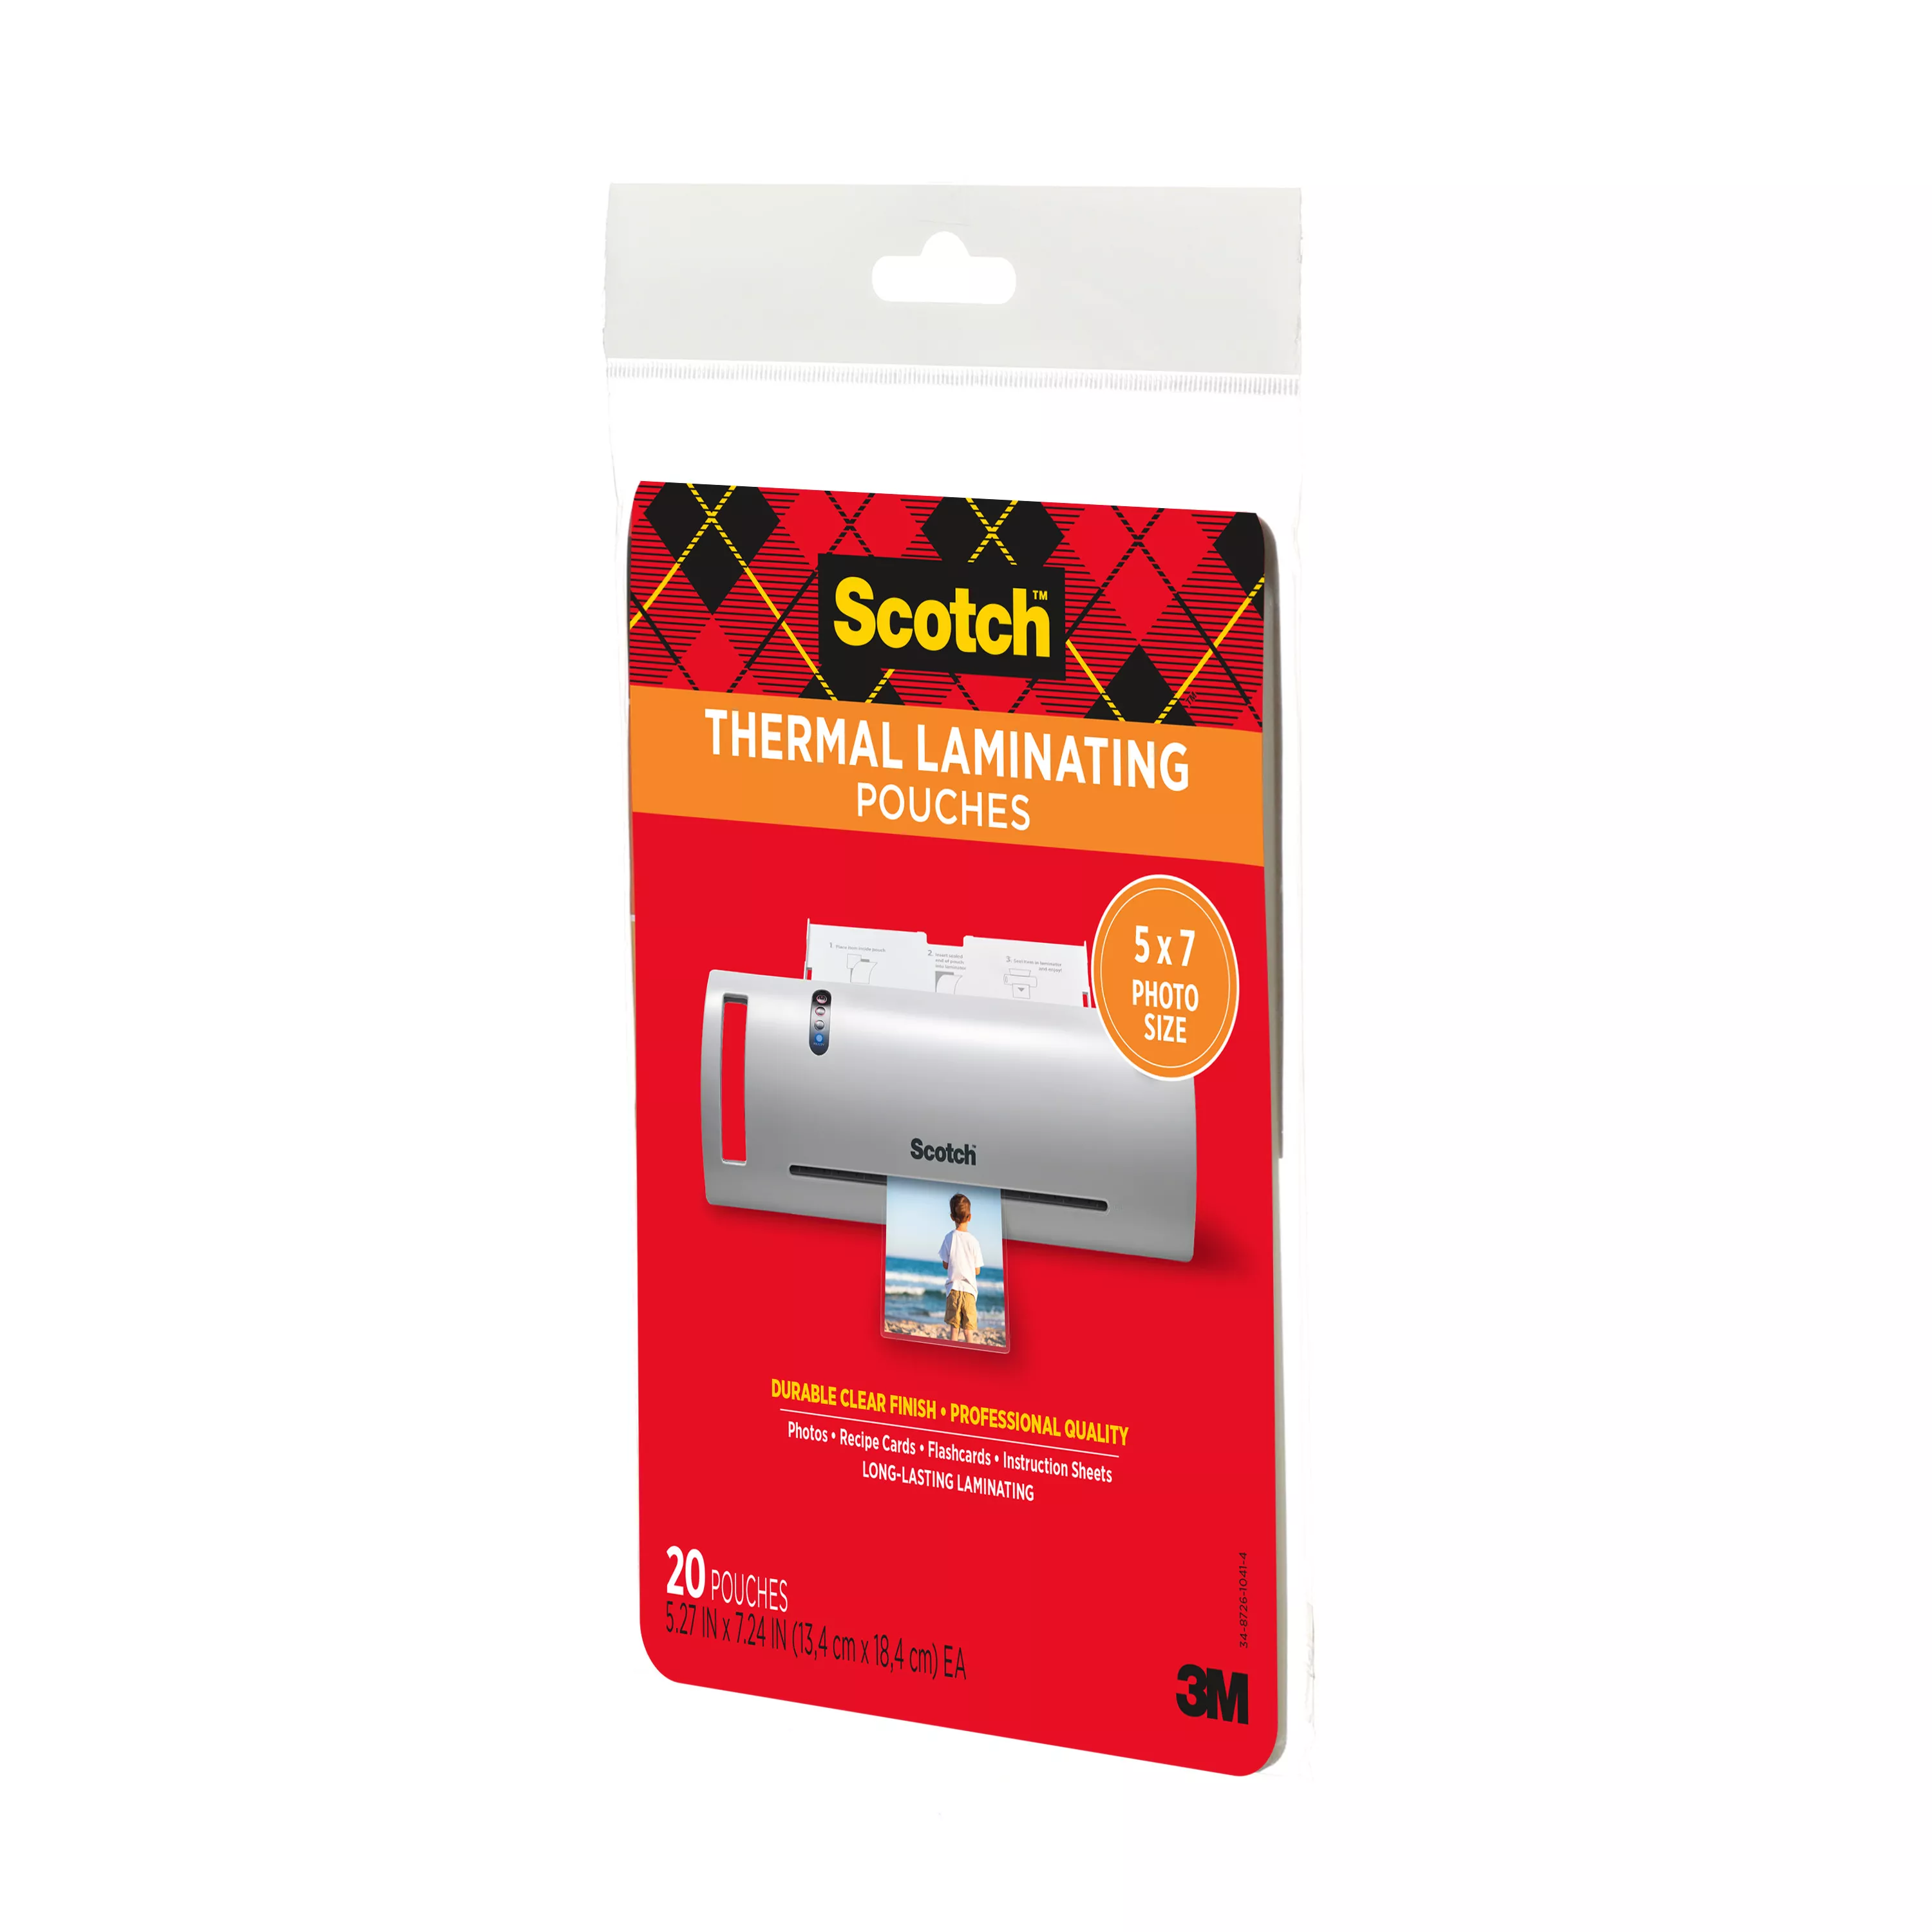 UPC 00051135806210 | Scotch™ Thermal Pouches TP5903-20 for items up to 5.27 in x 7.24 in